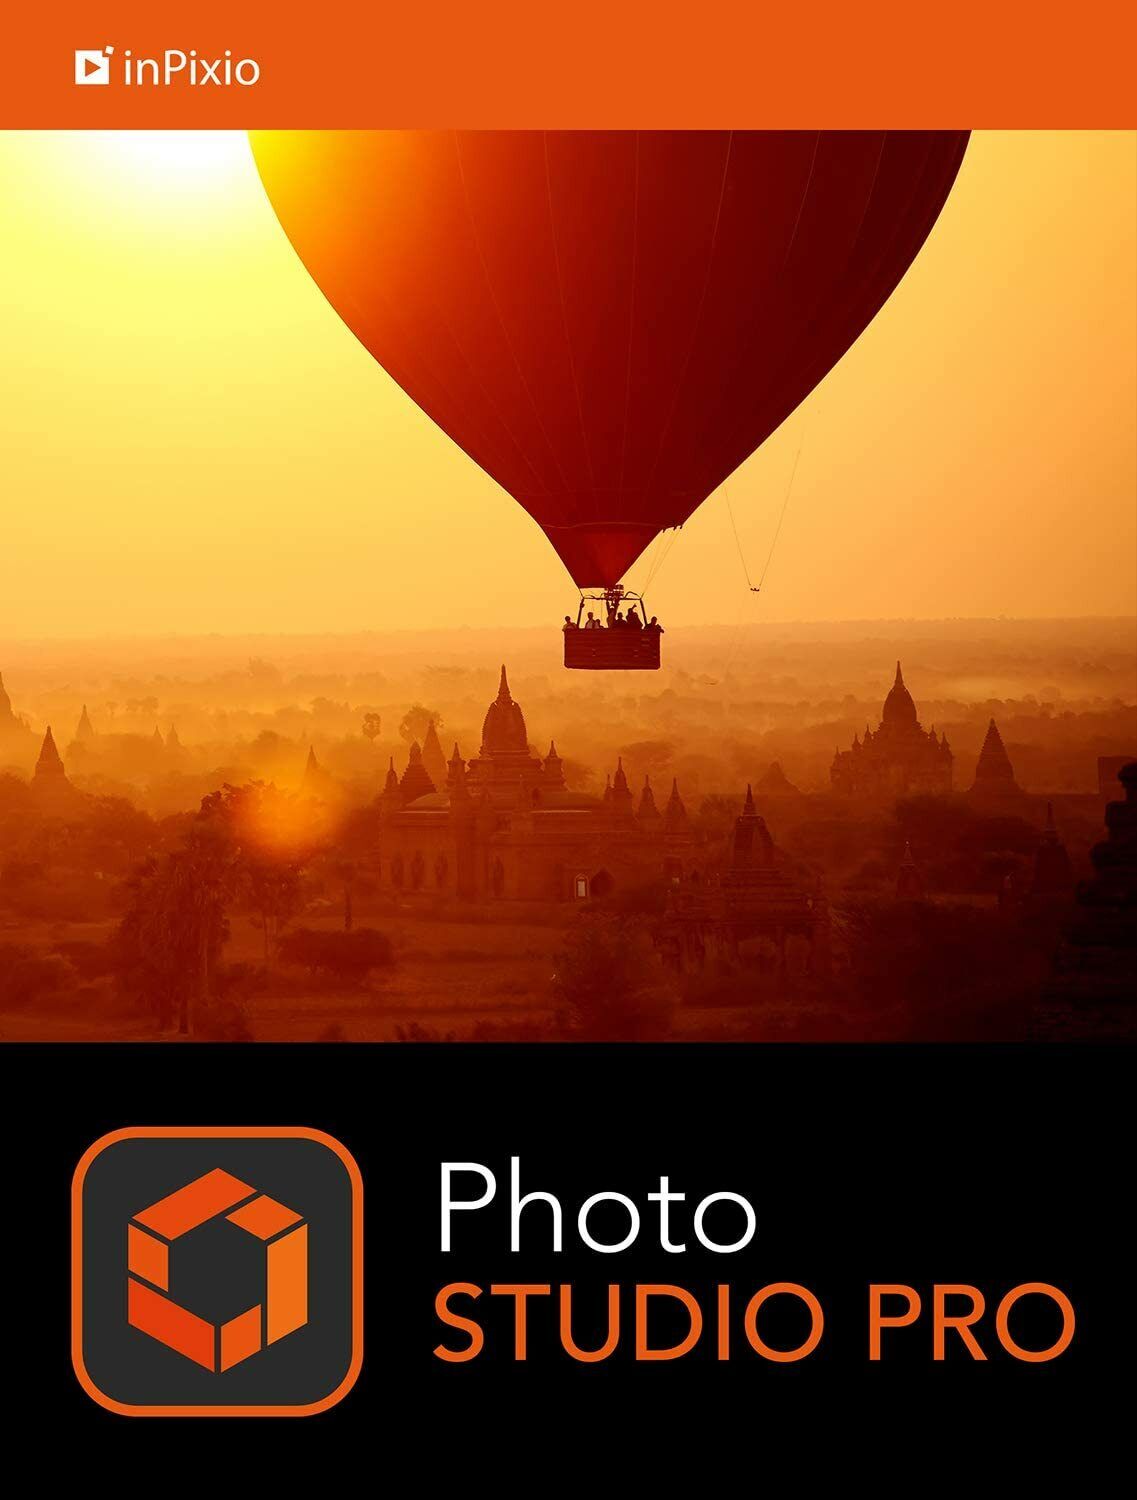 InPixio Photo Studio Pro {MAC OS},retouch, Remove objects  background DISC